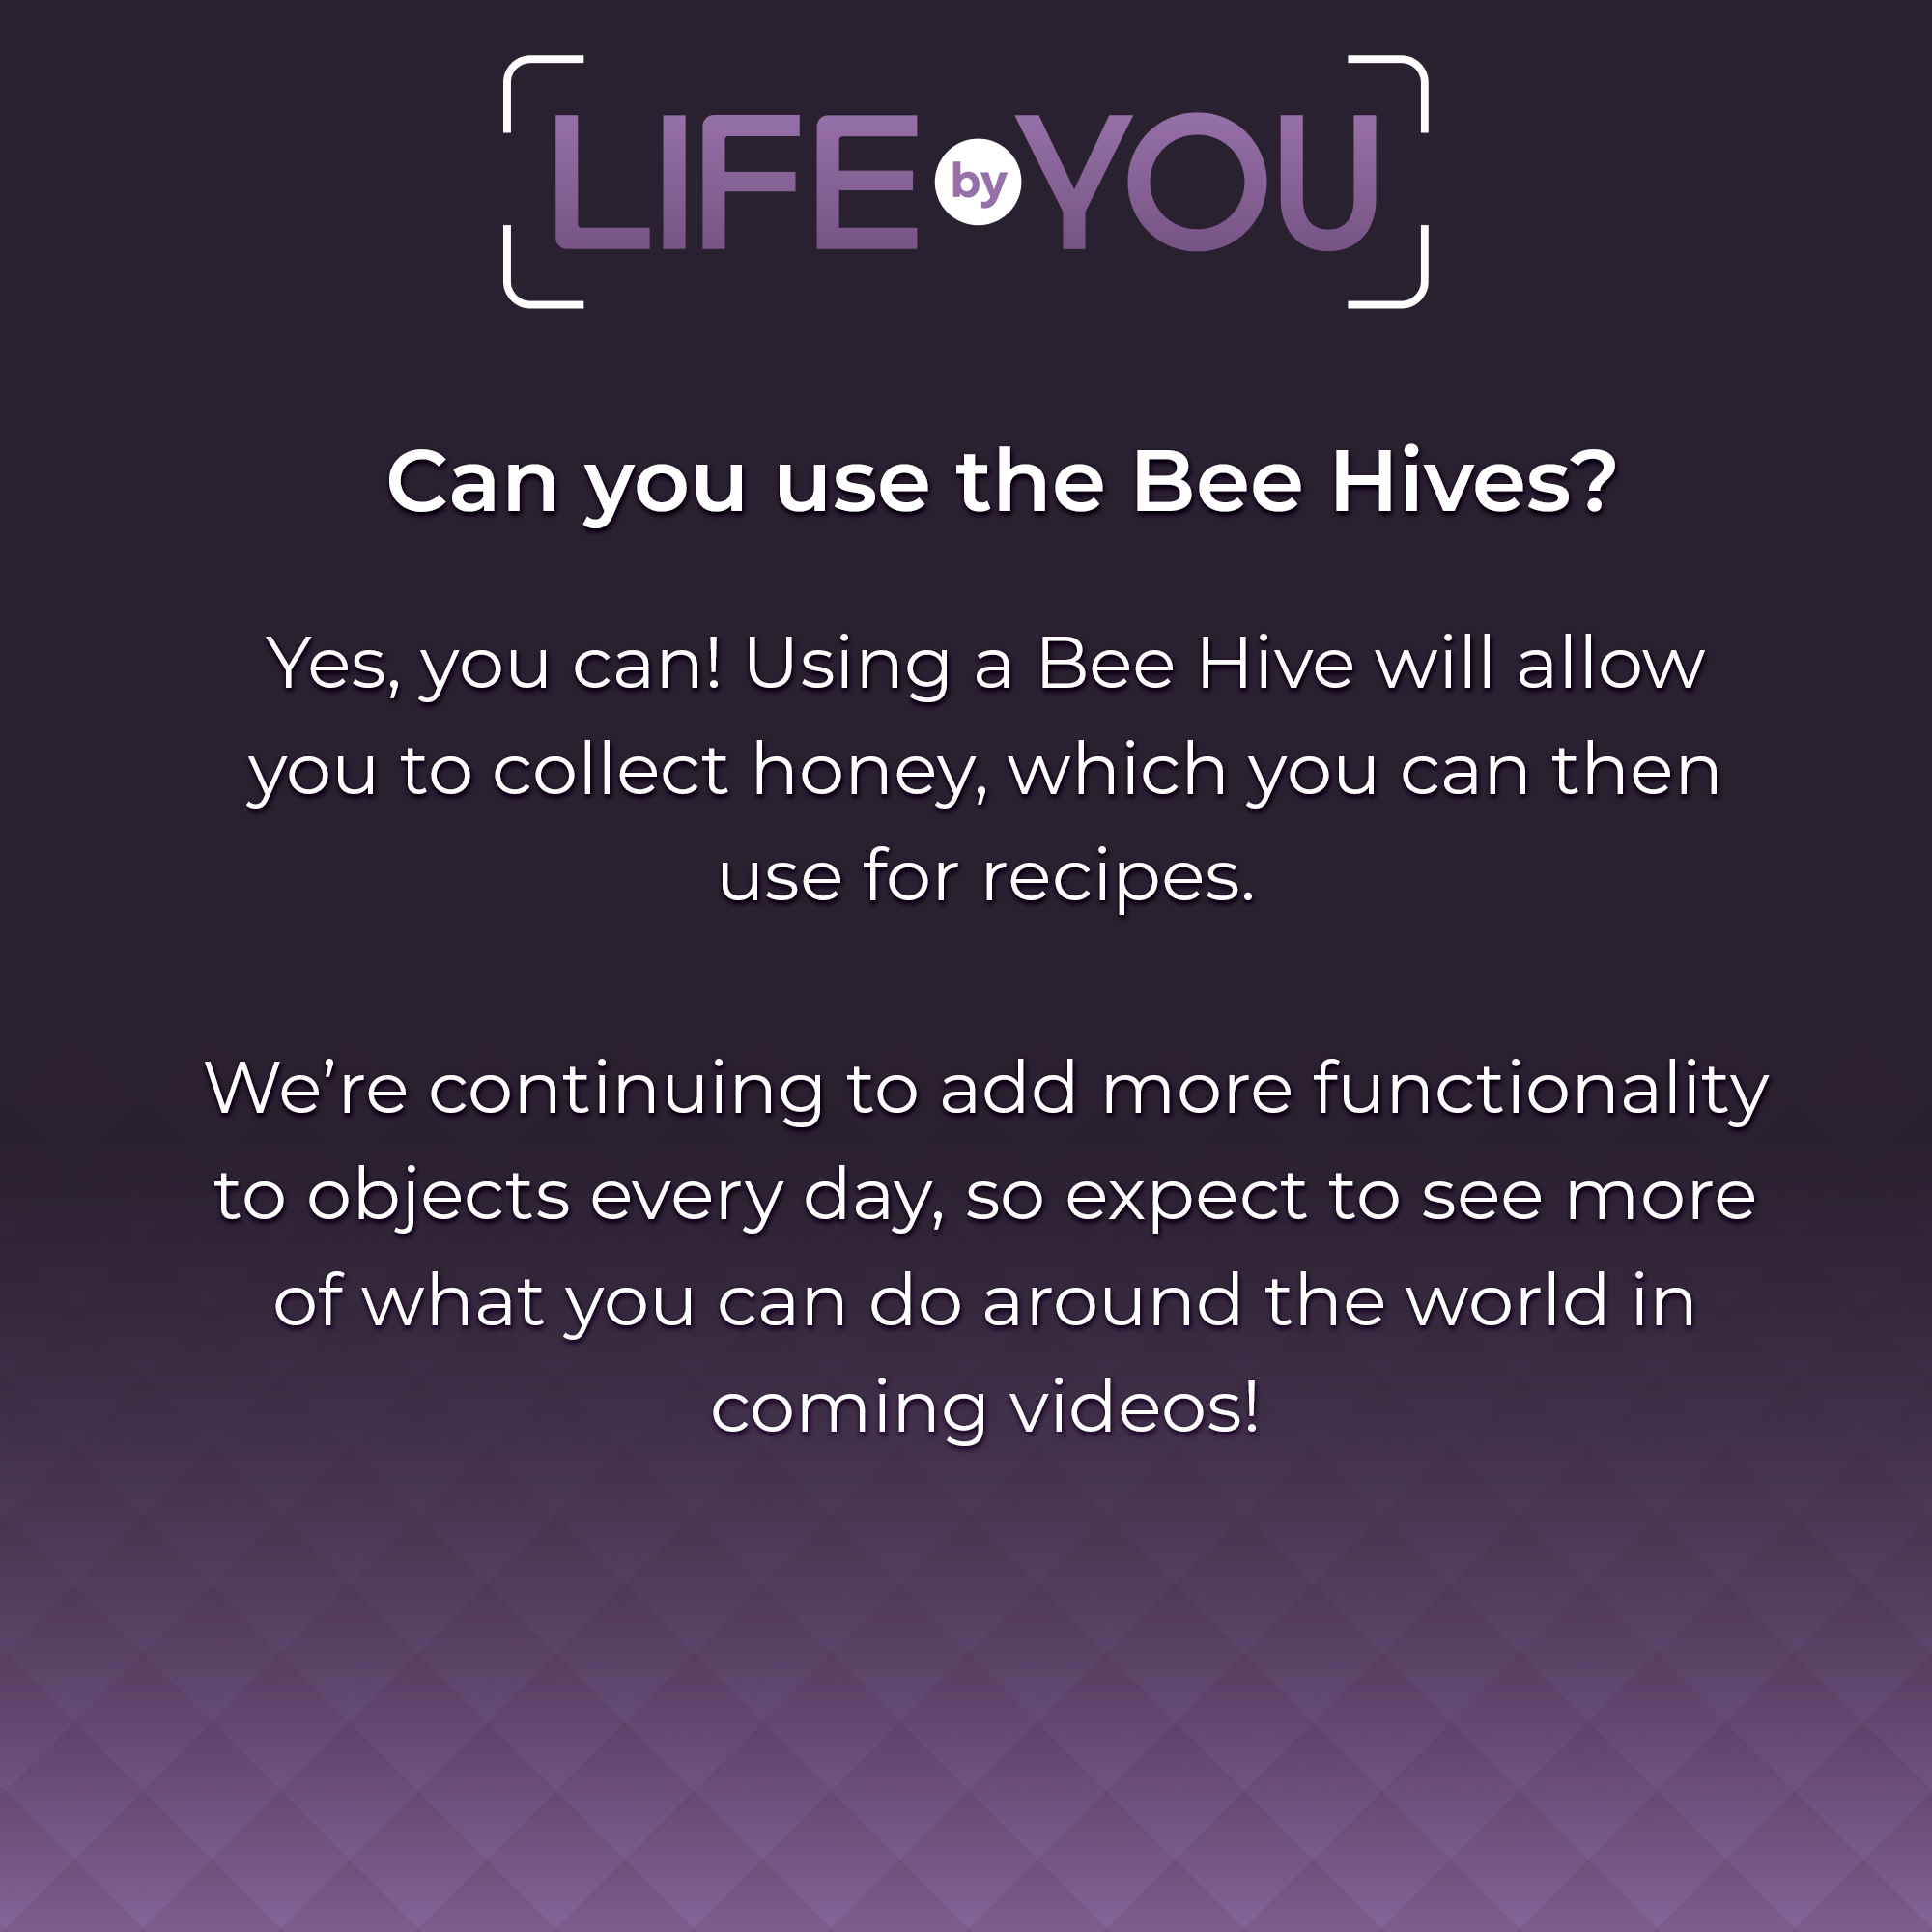 QnA Can you use bee hives?